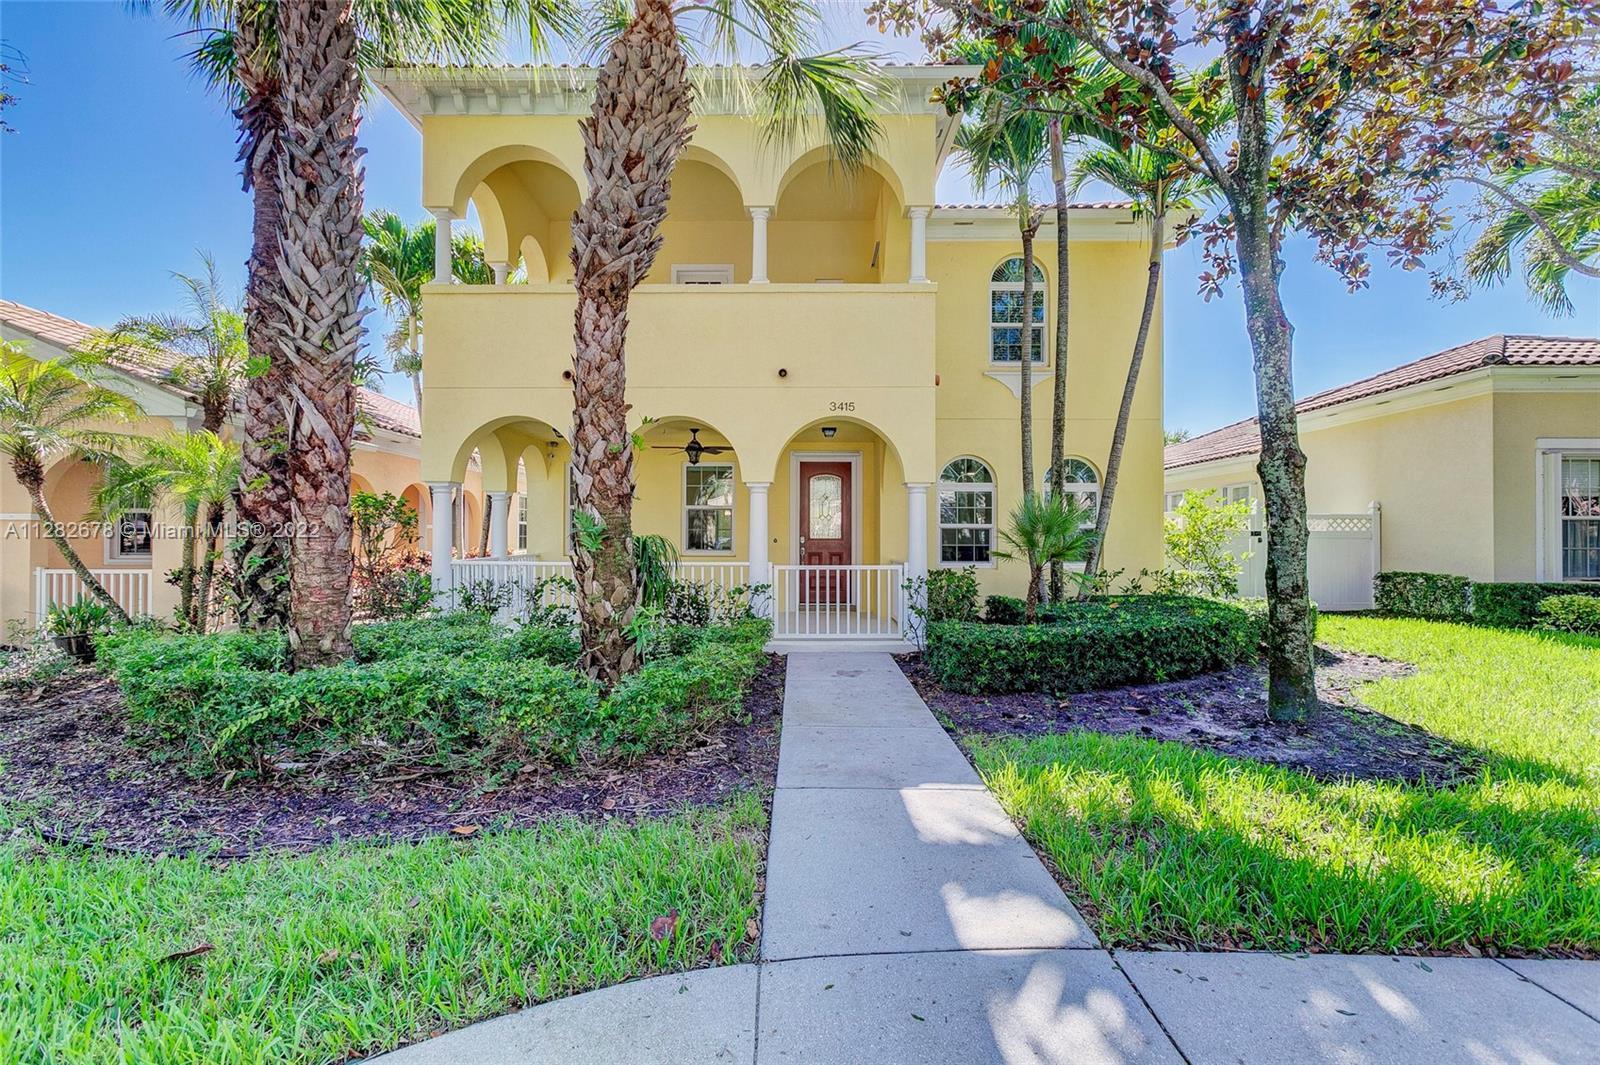 You will love living in one of the most sought-after neighborhoods in Jupiter Fl - Tuscany in Abacoa